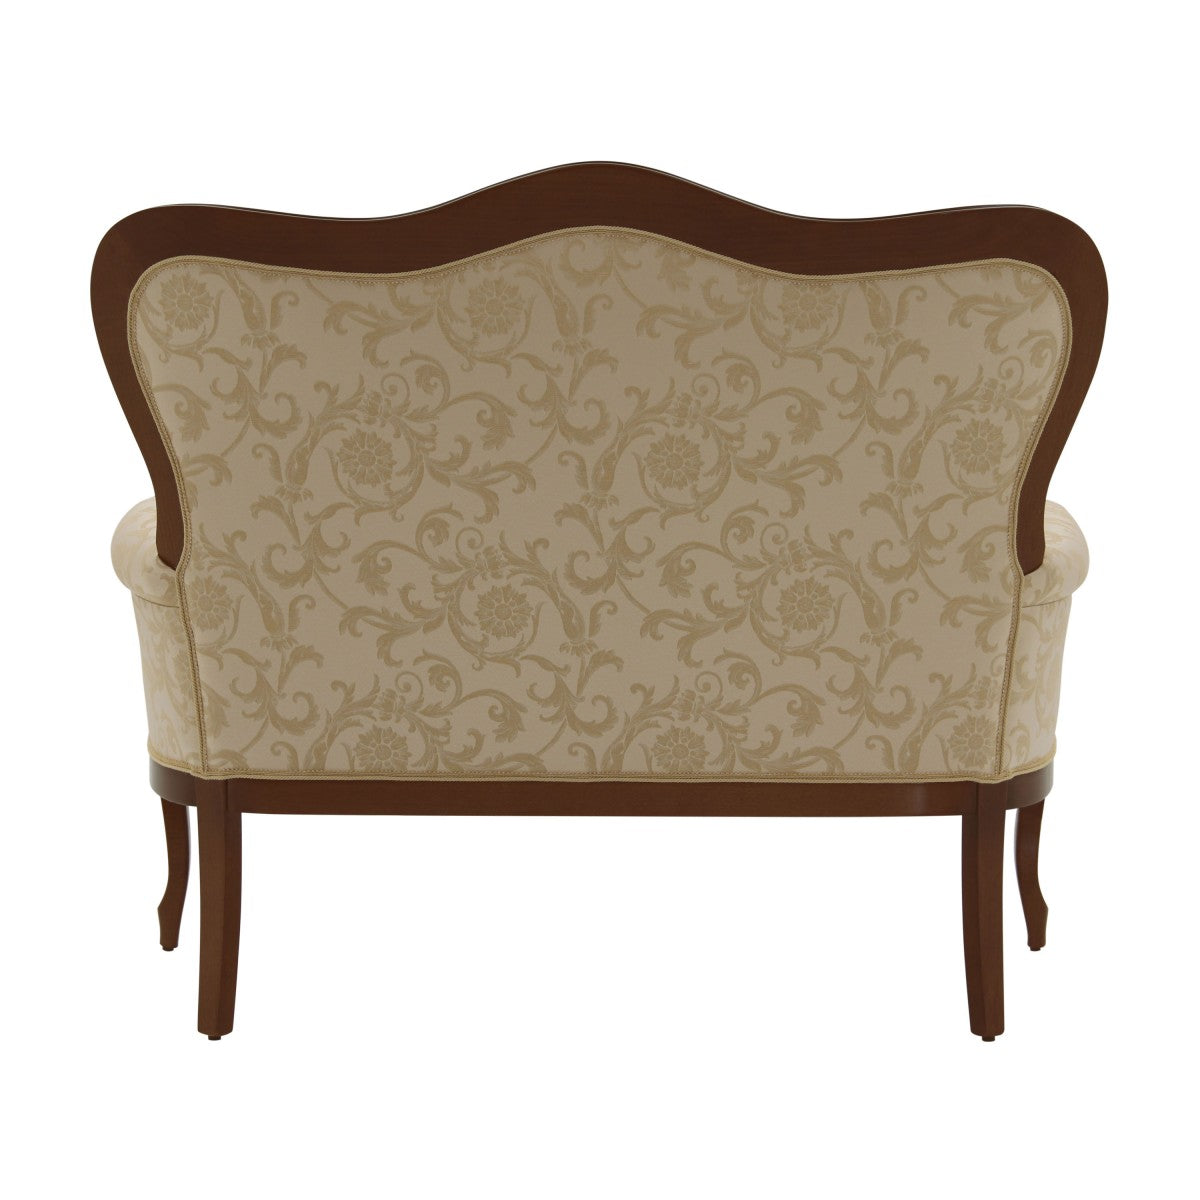 Filippo Bespoke Upholstered Louis Philippe Style Curved Back Two Seater Sofa MS217D Custom Made To Order